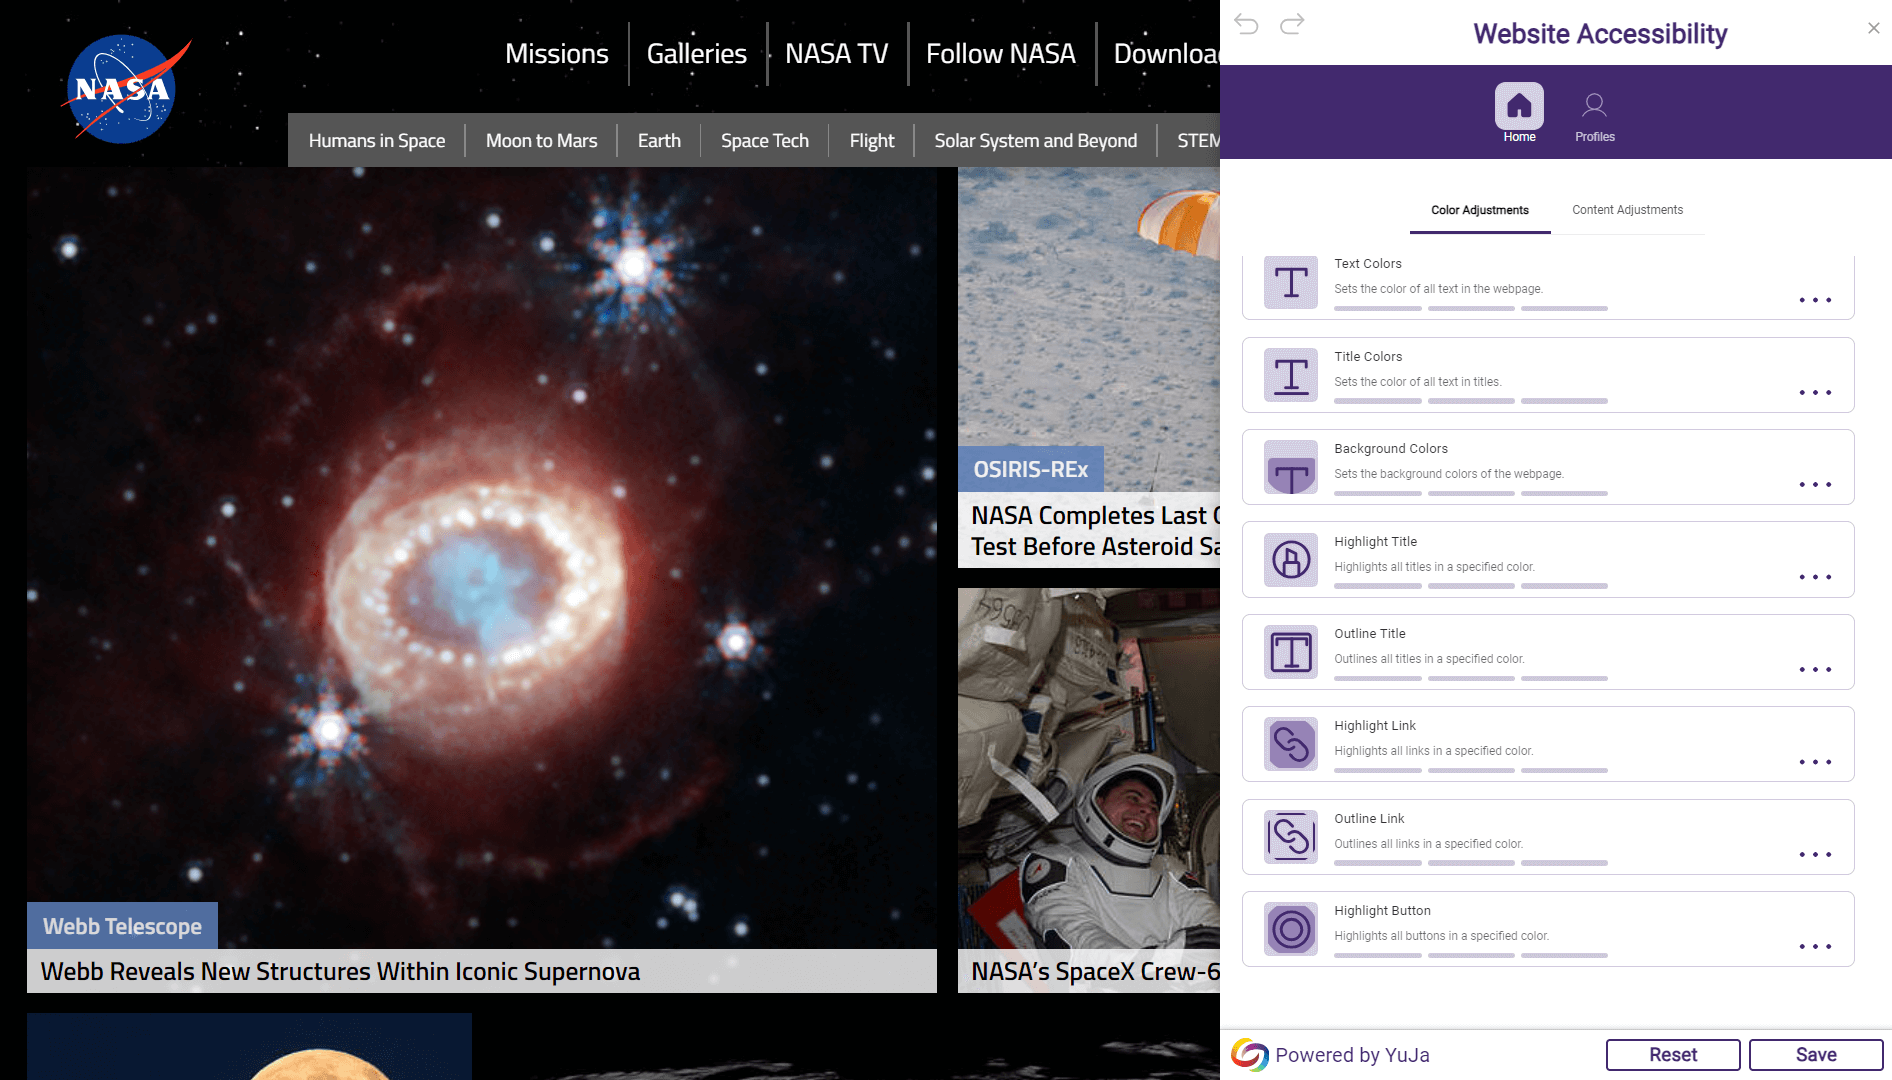 The NASA website with the color adjustments menu open.